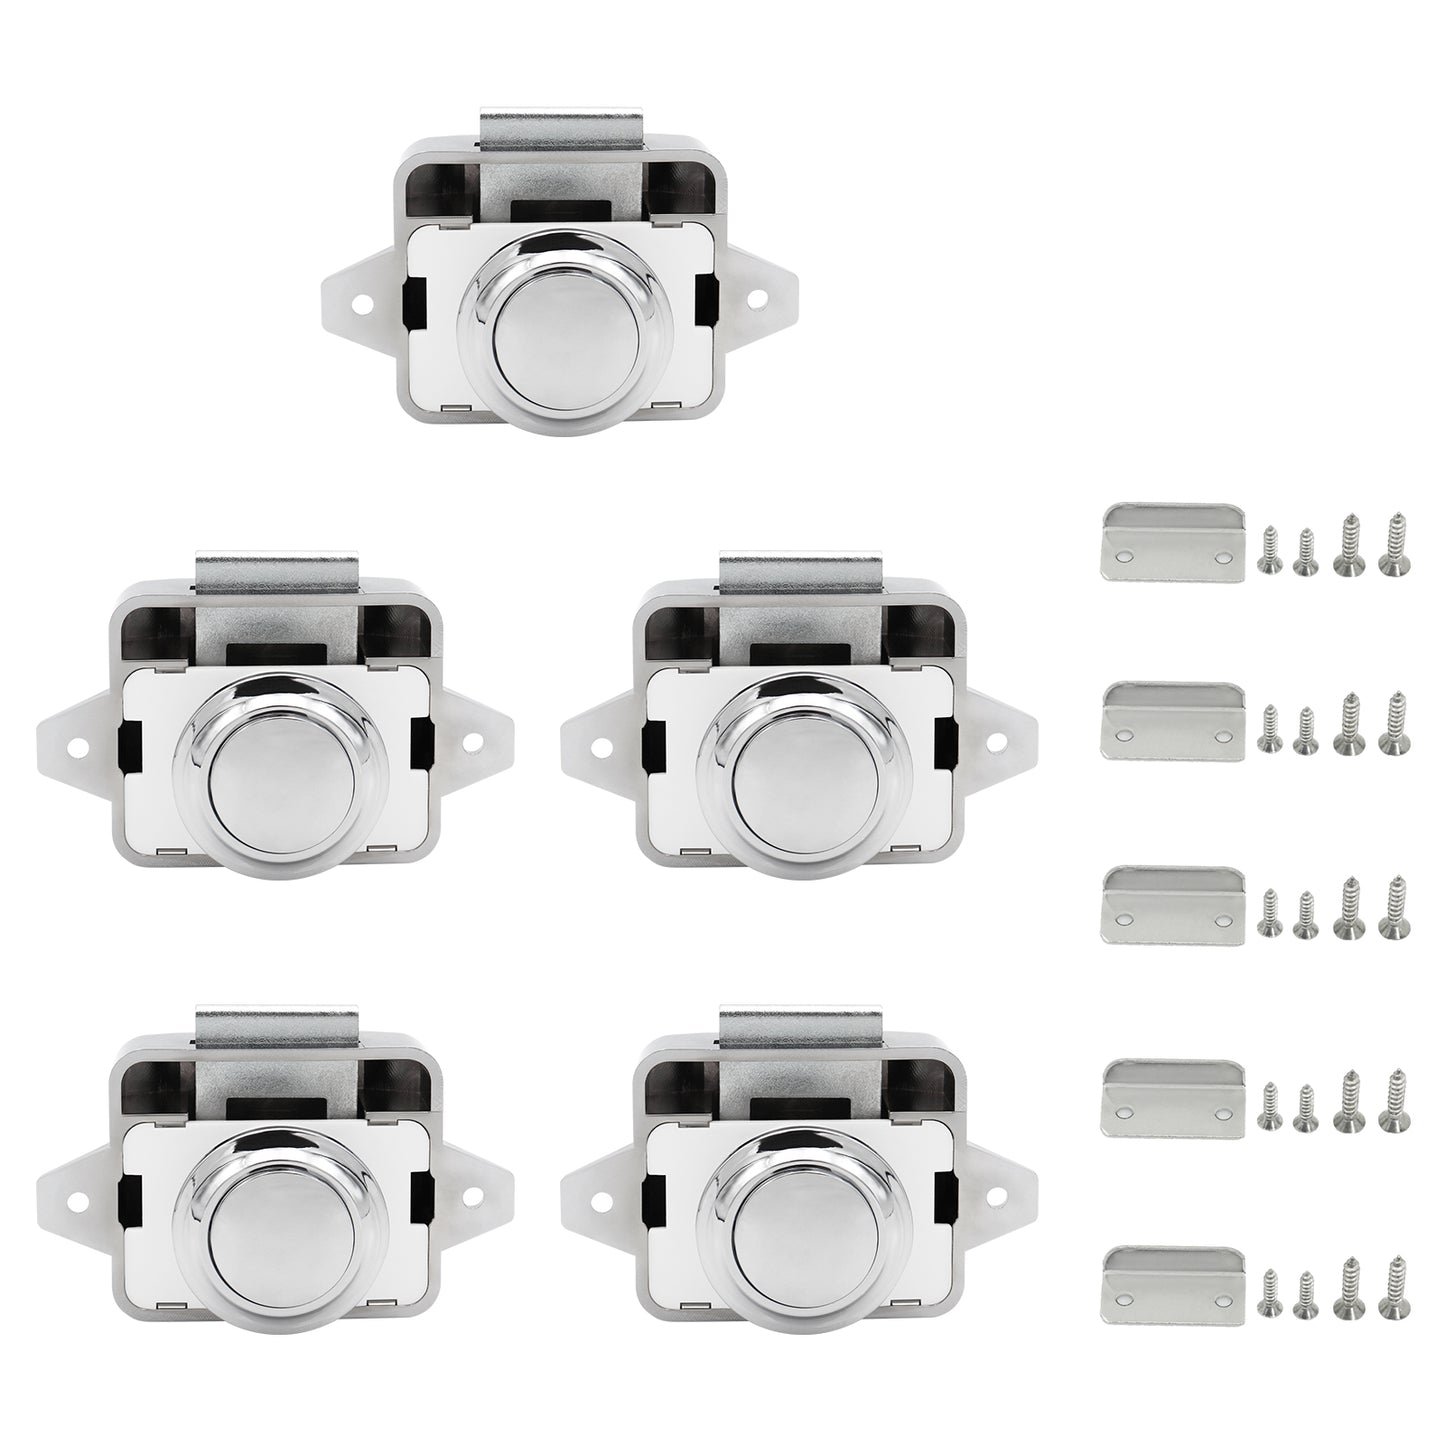 LENKRAD Push Button Drawer Latch, 5 Packs Camper Cupboard Knob RV Compartment Latch Catches for Caravan Yacht Boat Motorhome Cabinet Drawer, ABS & Zinc Alloy - THALASSA